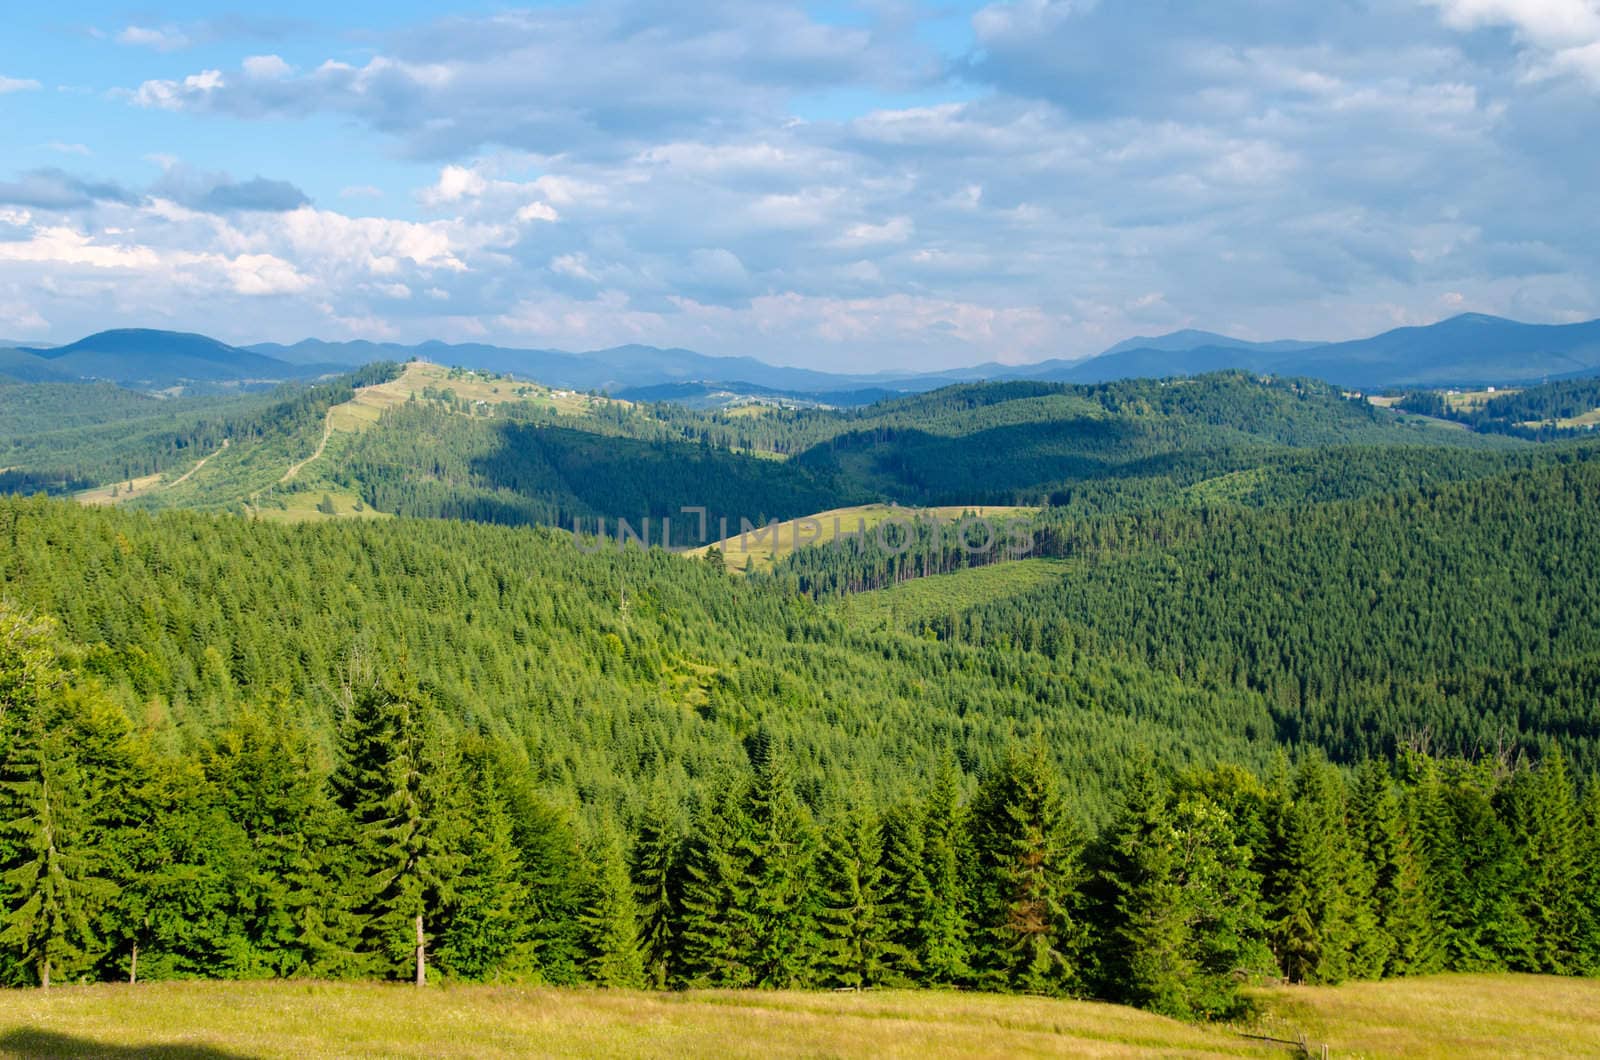 Beautiful green mountain landscape with trees in Carpathians